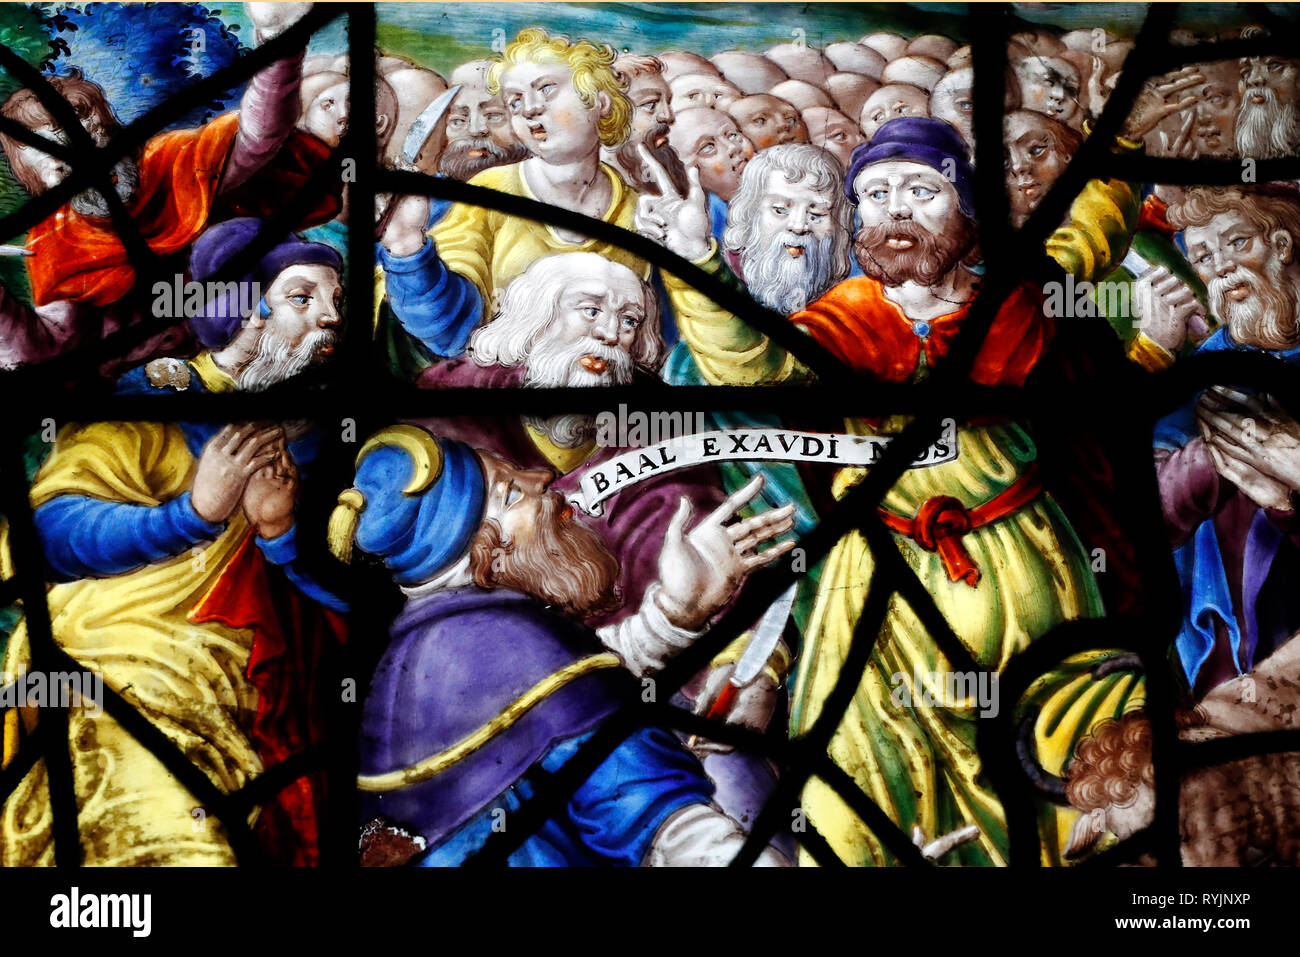 Saint Etienne du Mont church.  Stained glass window. The priests of Baal.  Paris. France. Stock Photo